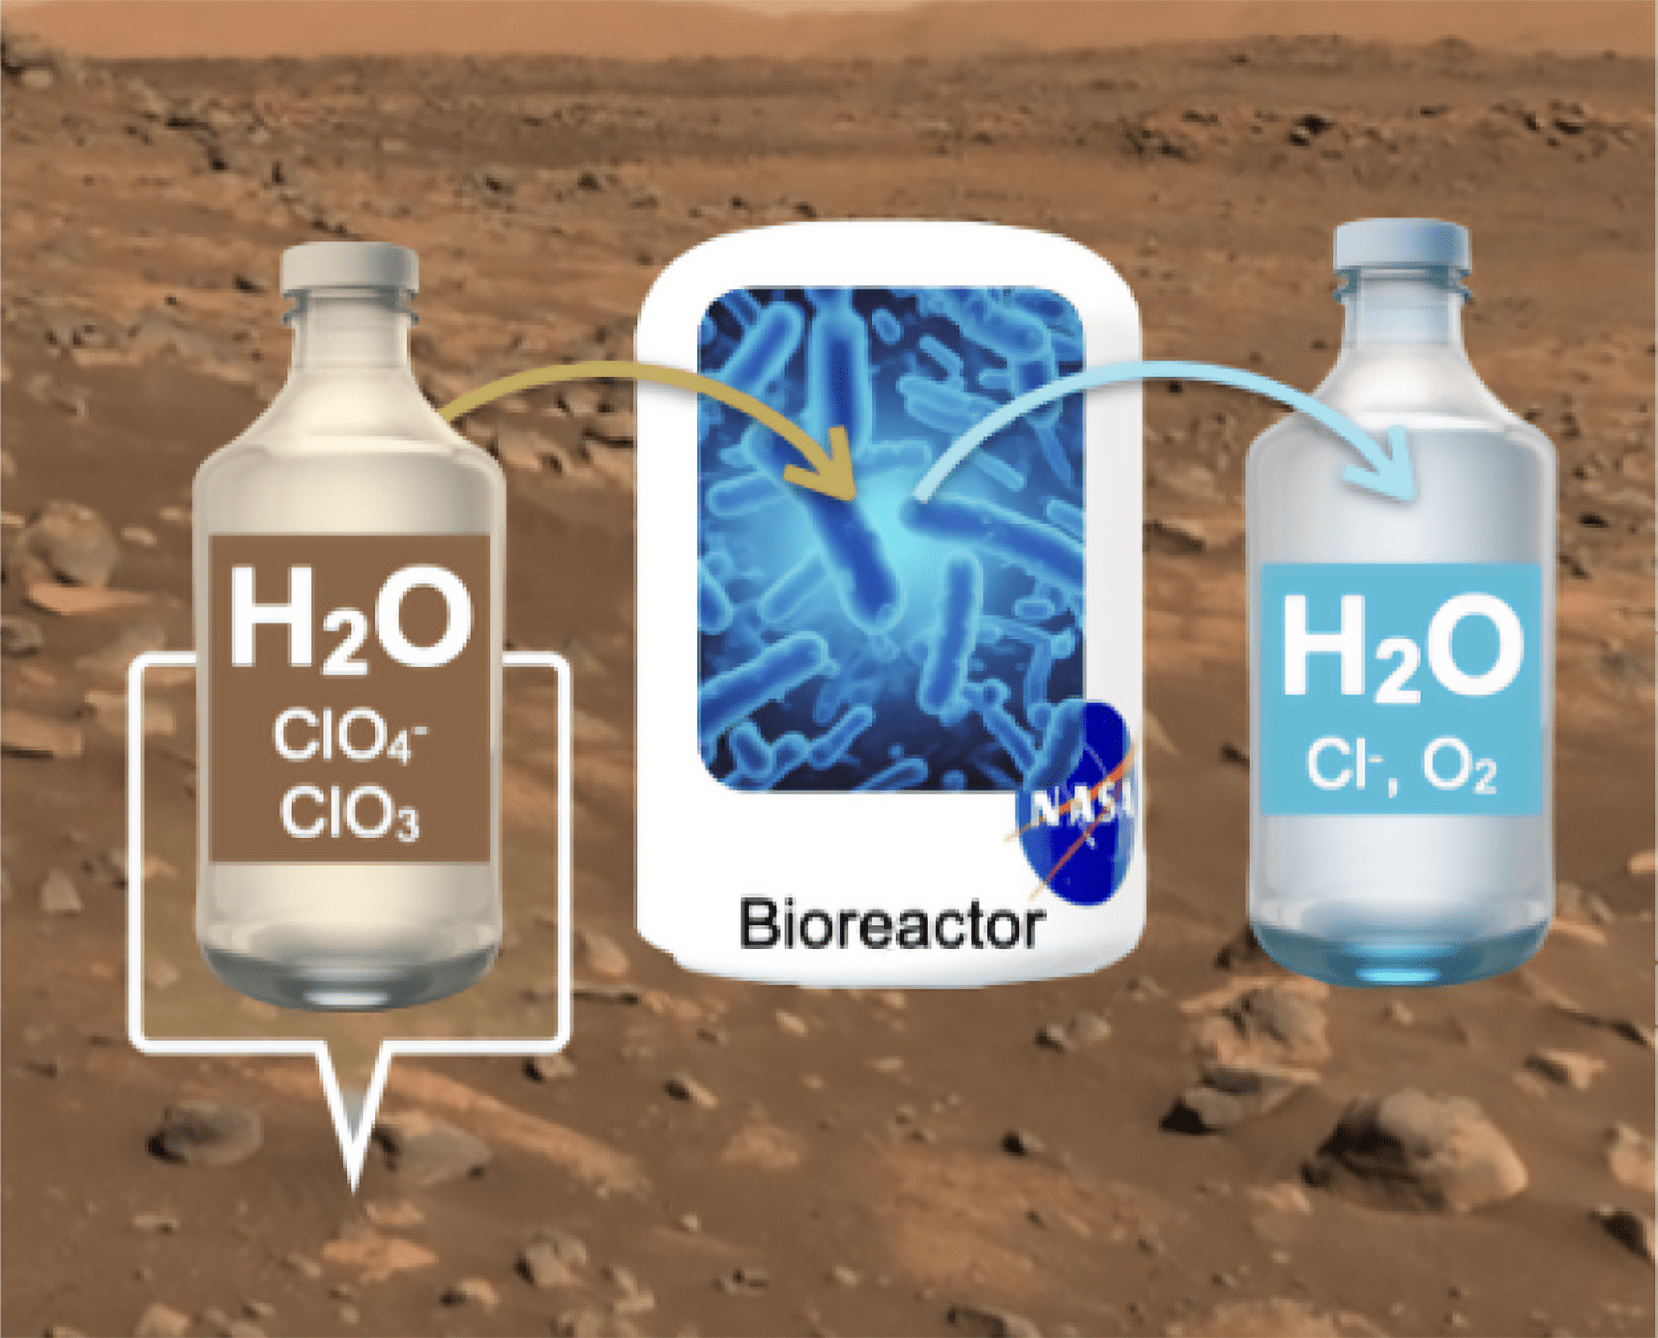 Artist rendition of a bottle of H2O, Bioreactor and H2O with a planetary surface in the background.